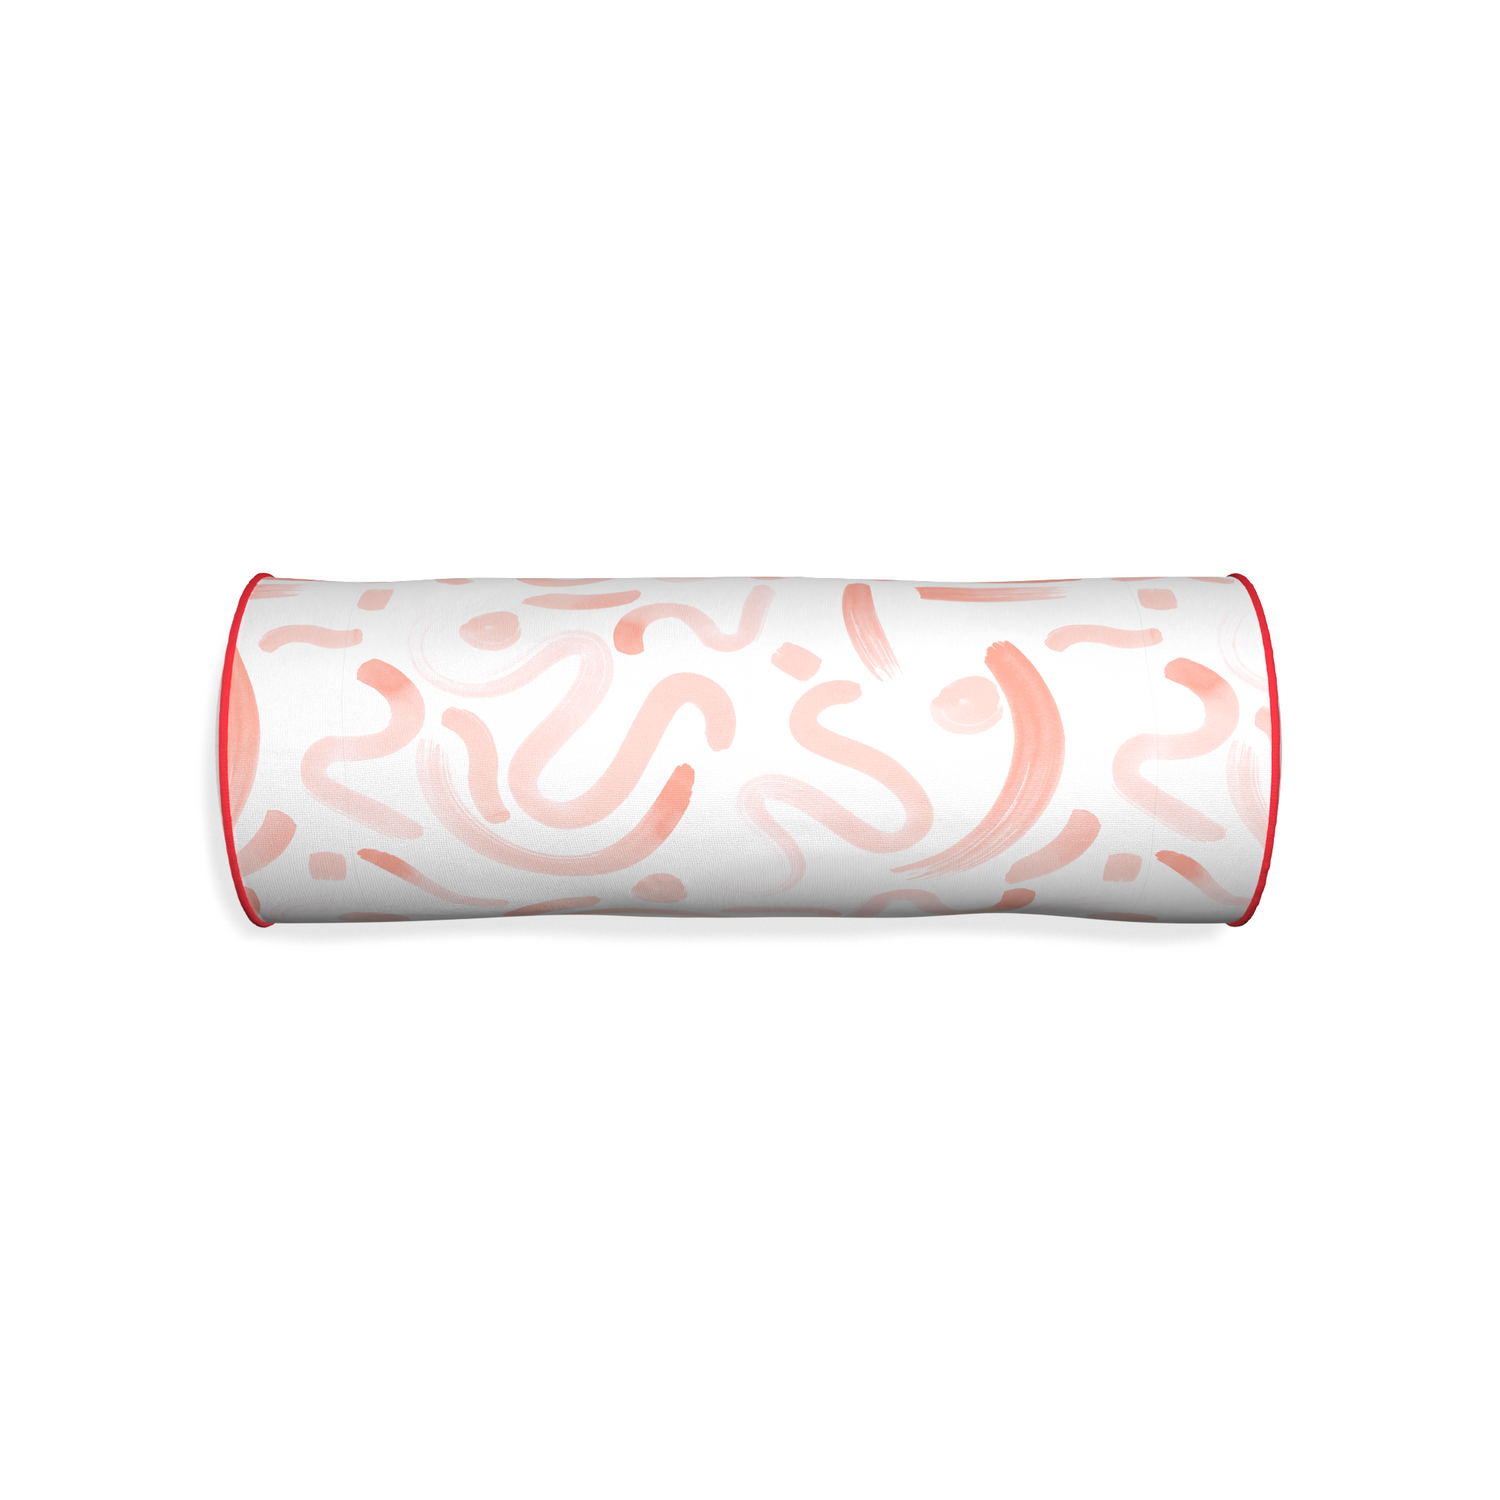 Bolster hockney pink custom pink graphicpillow with cherry piping on white background